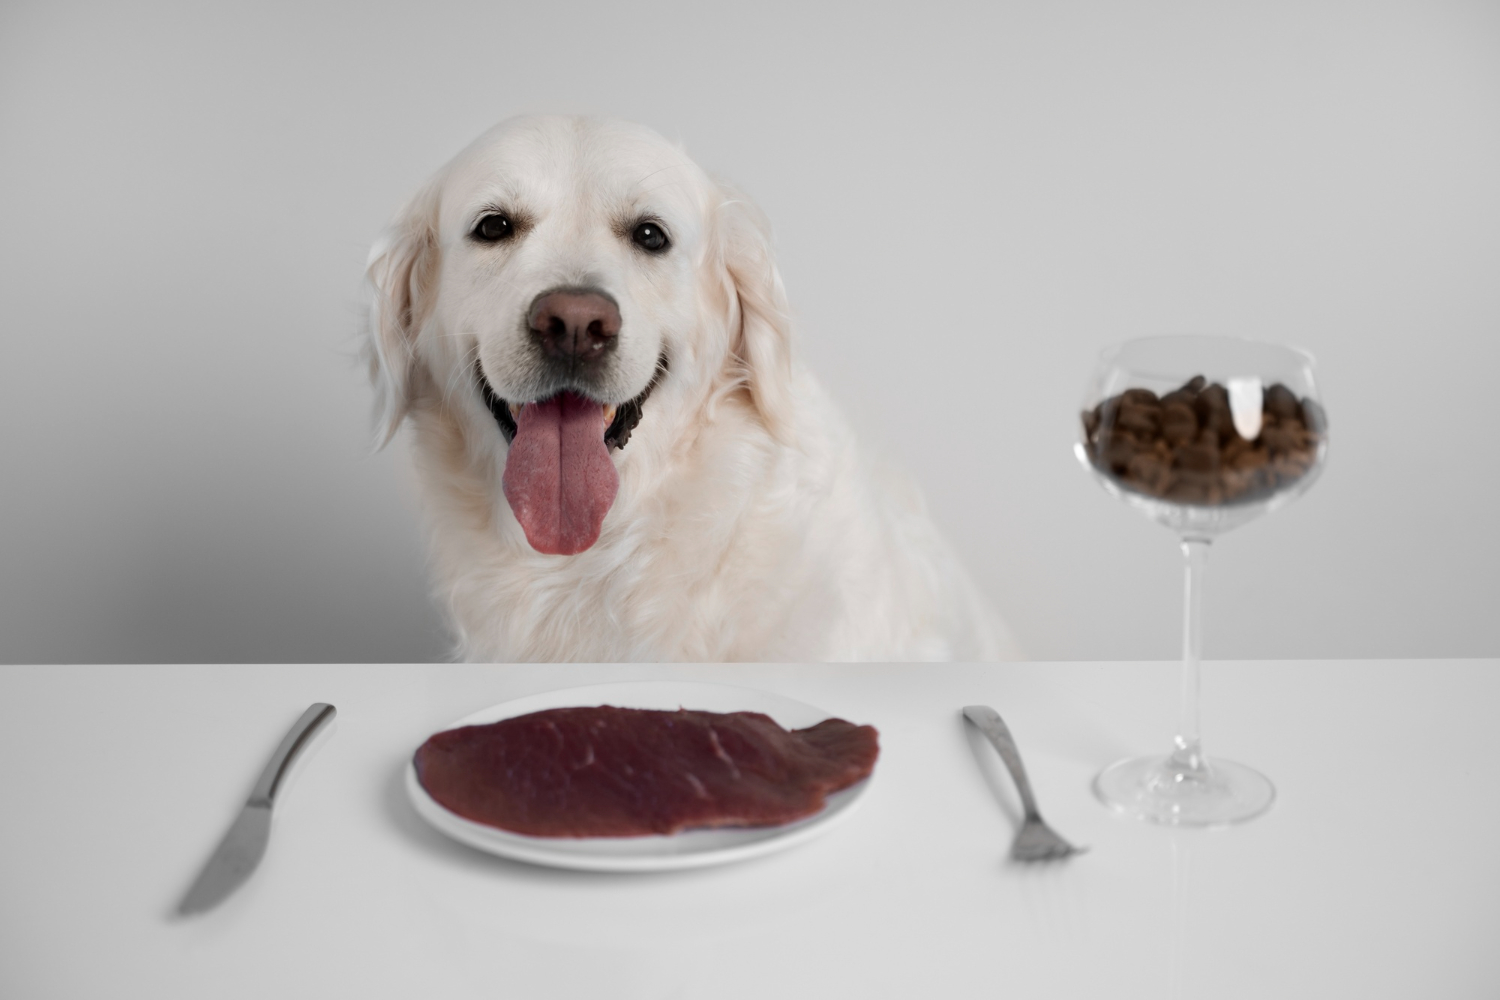 Human food safe for dogs